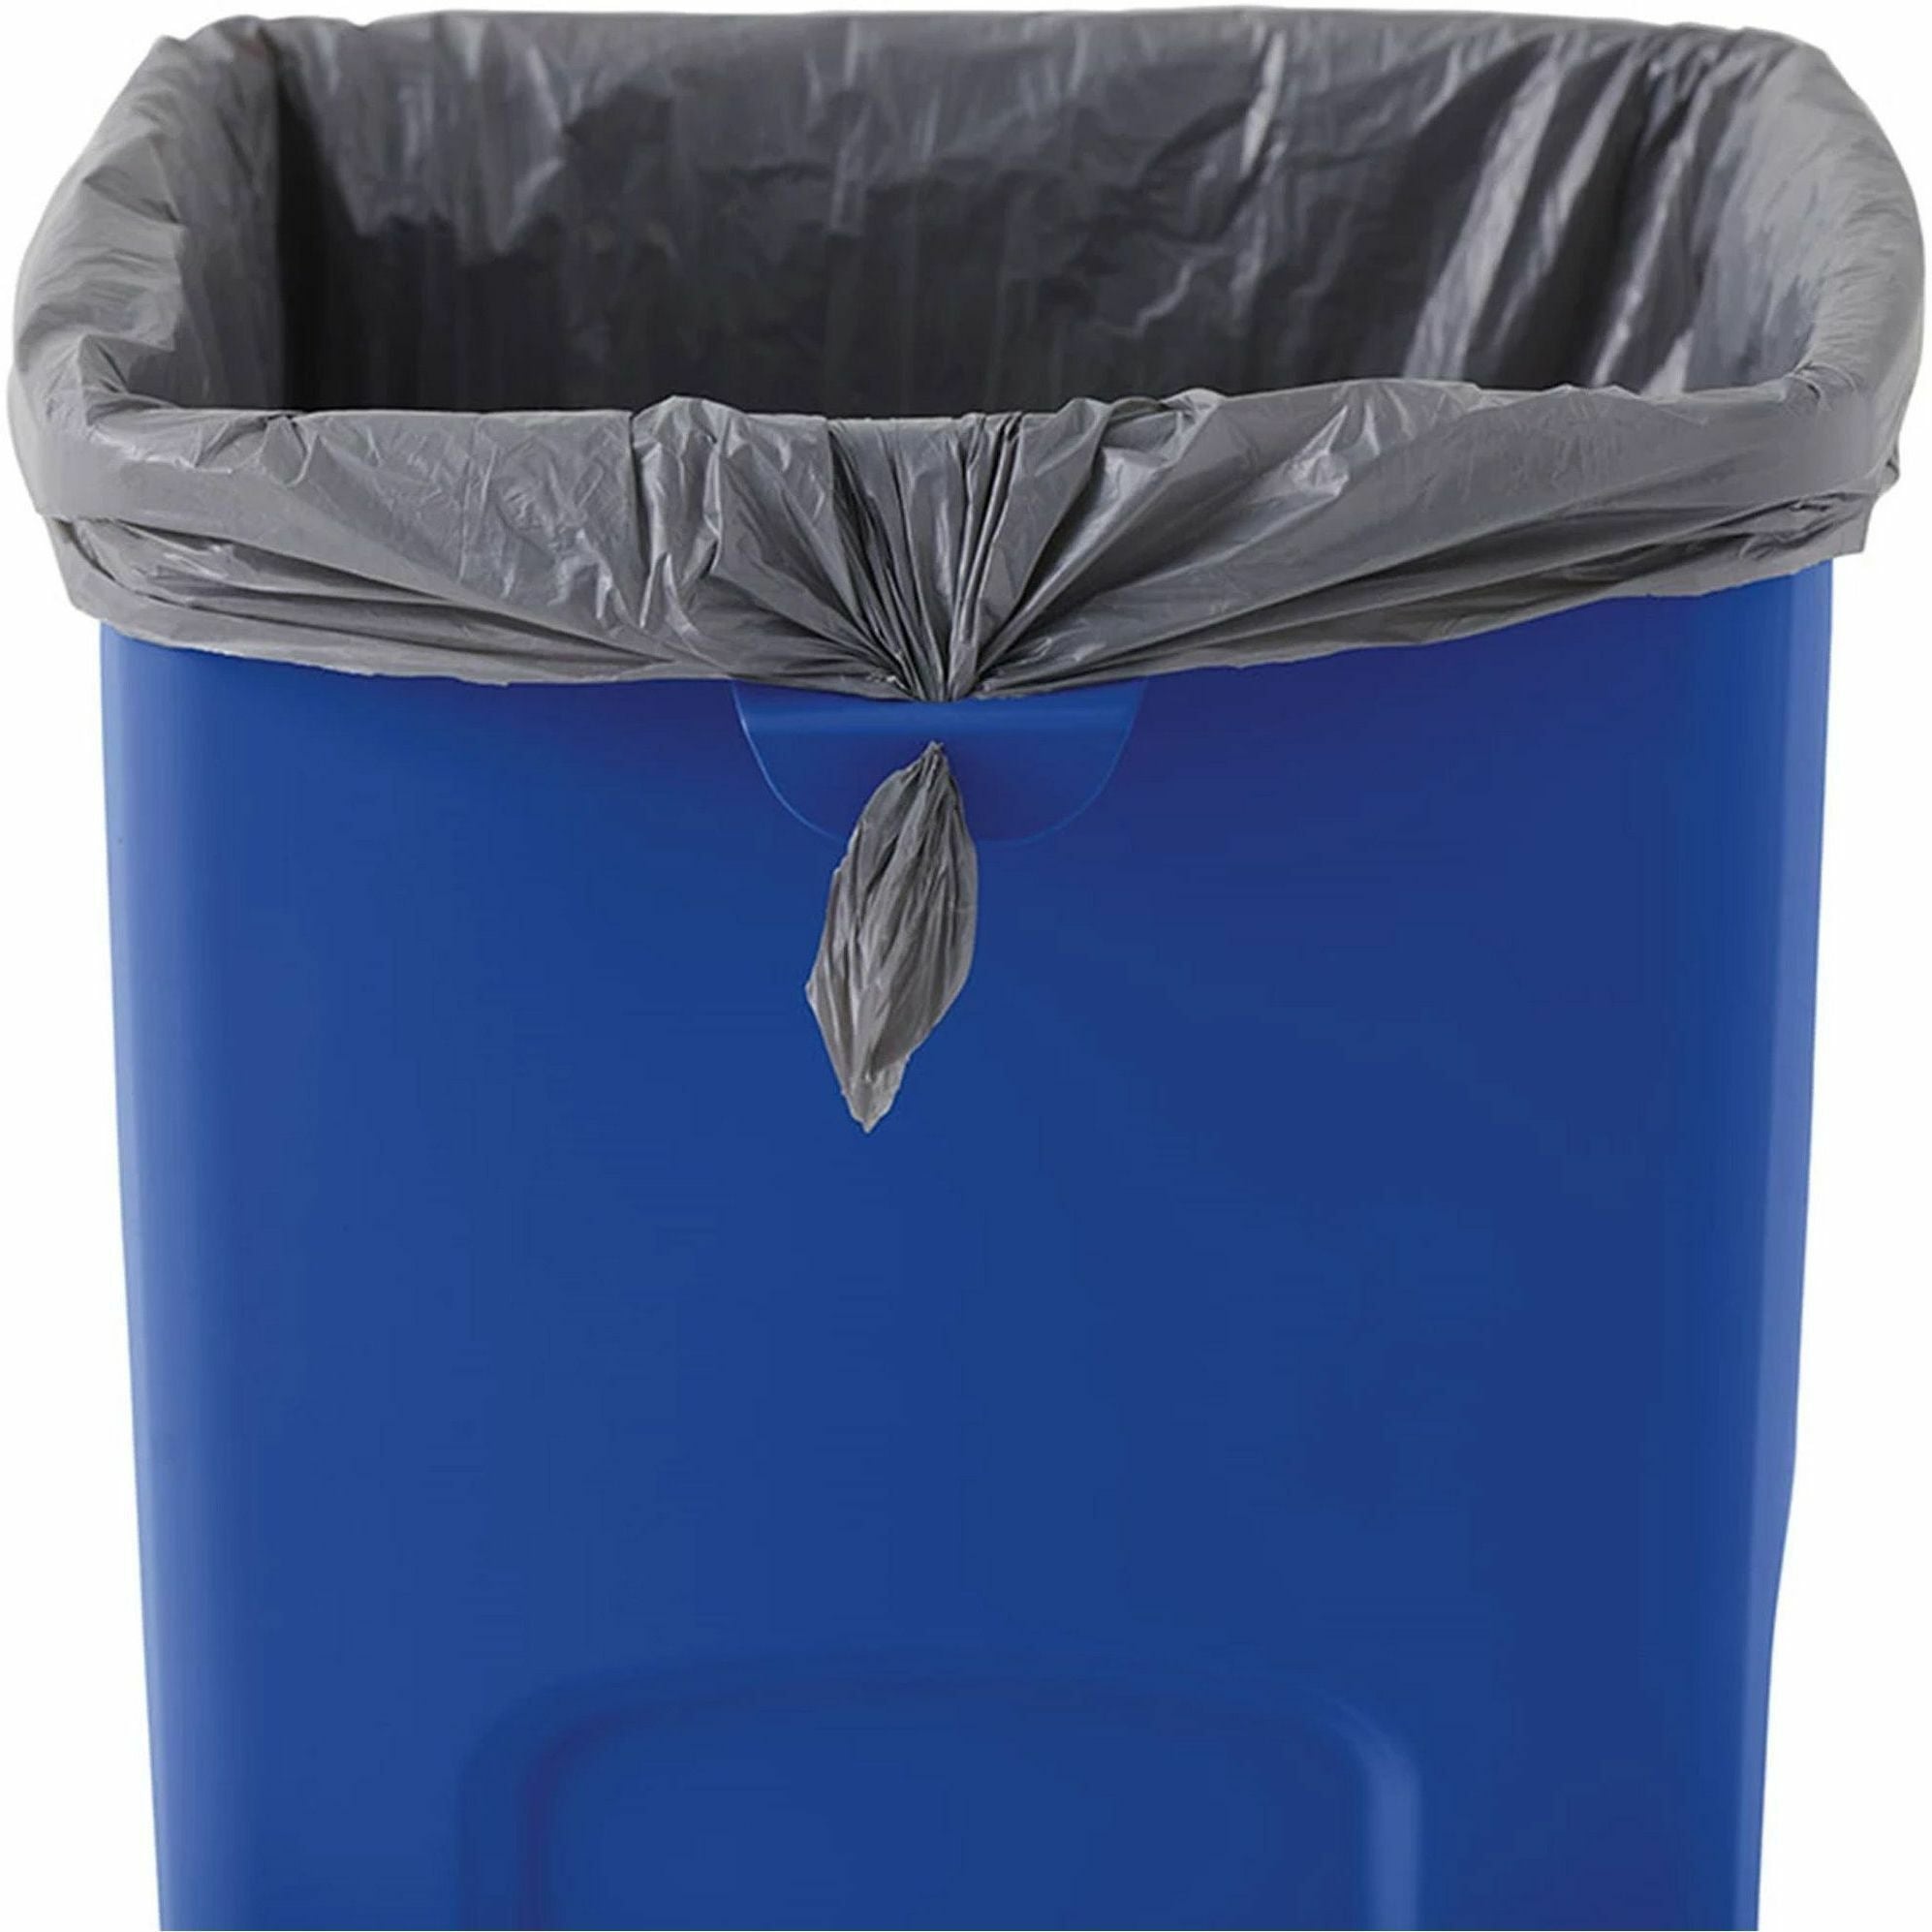 rubbermaid-commercial-untouchable-square-container-23-gal-capacity-square-329-height-x-165-width-x-155-depth-resin-blue-4-carton_rcp356973bect - 3